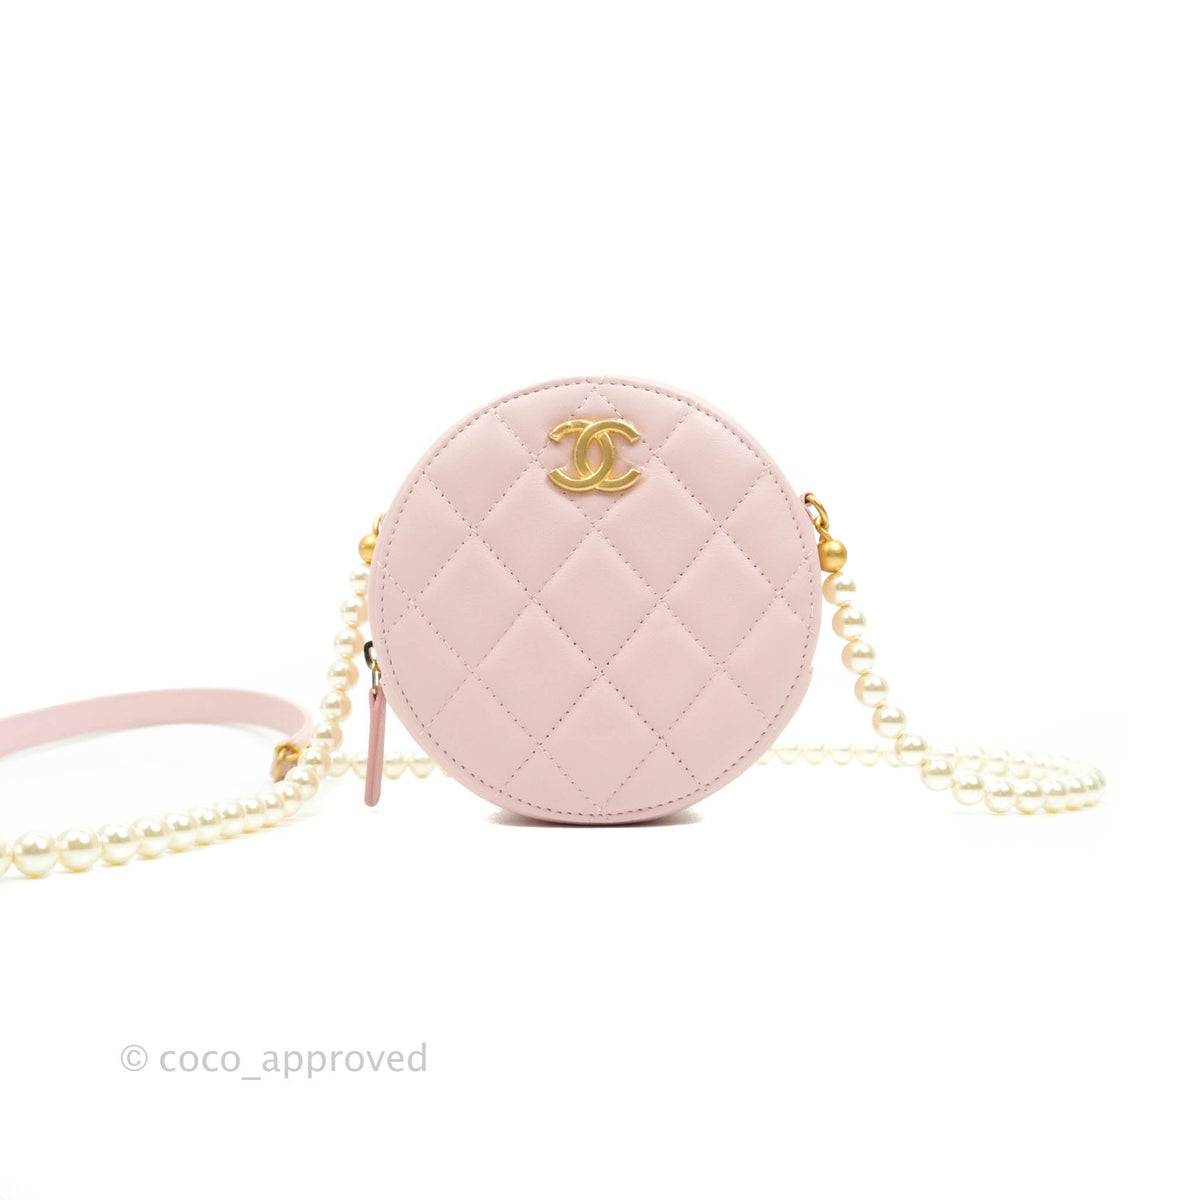 Chanel Pearl Clutch - 9 For Sale on 1stDibs  chanel pearl crush clutch  with chain, chanel clutch with pearl chain, chanel pearl clutch with chain